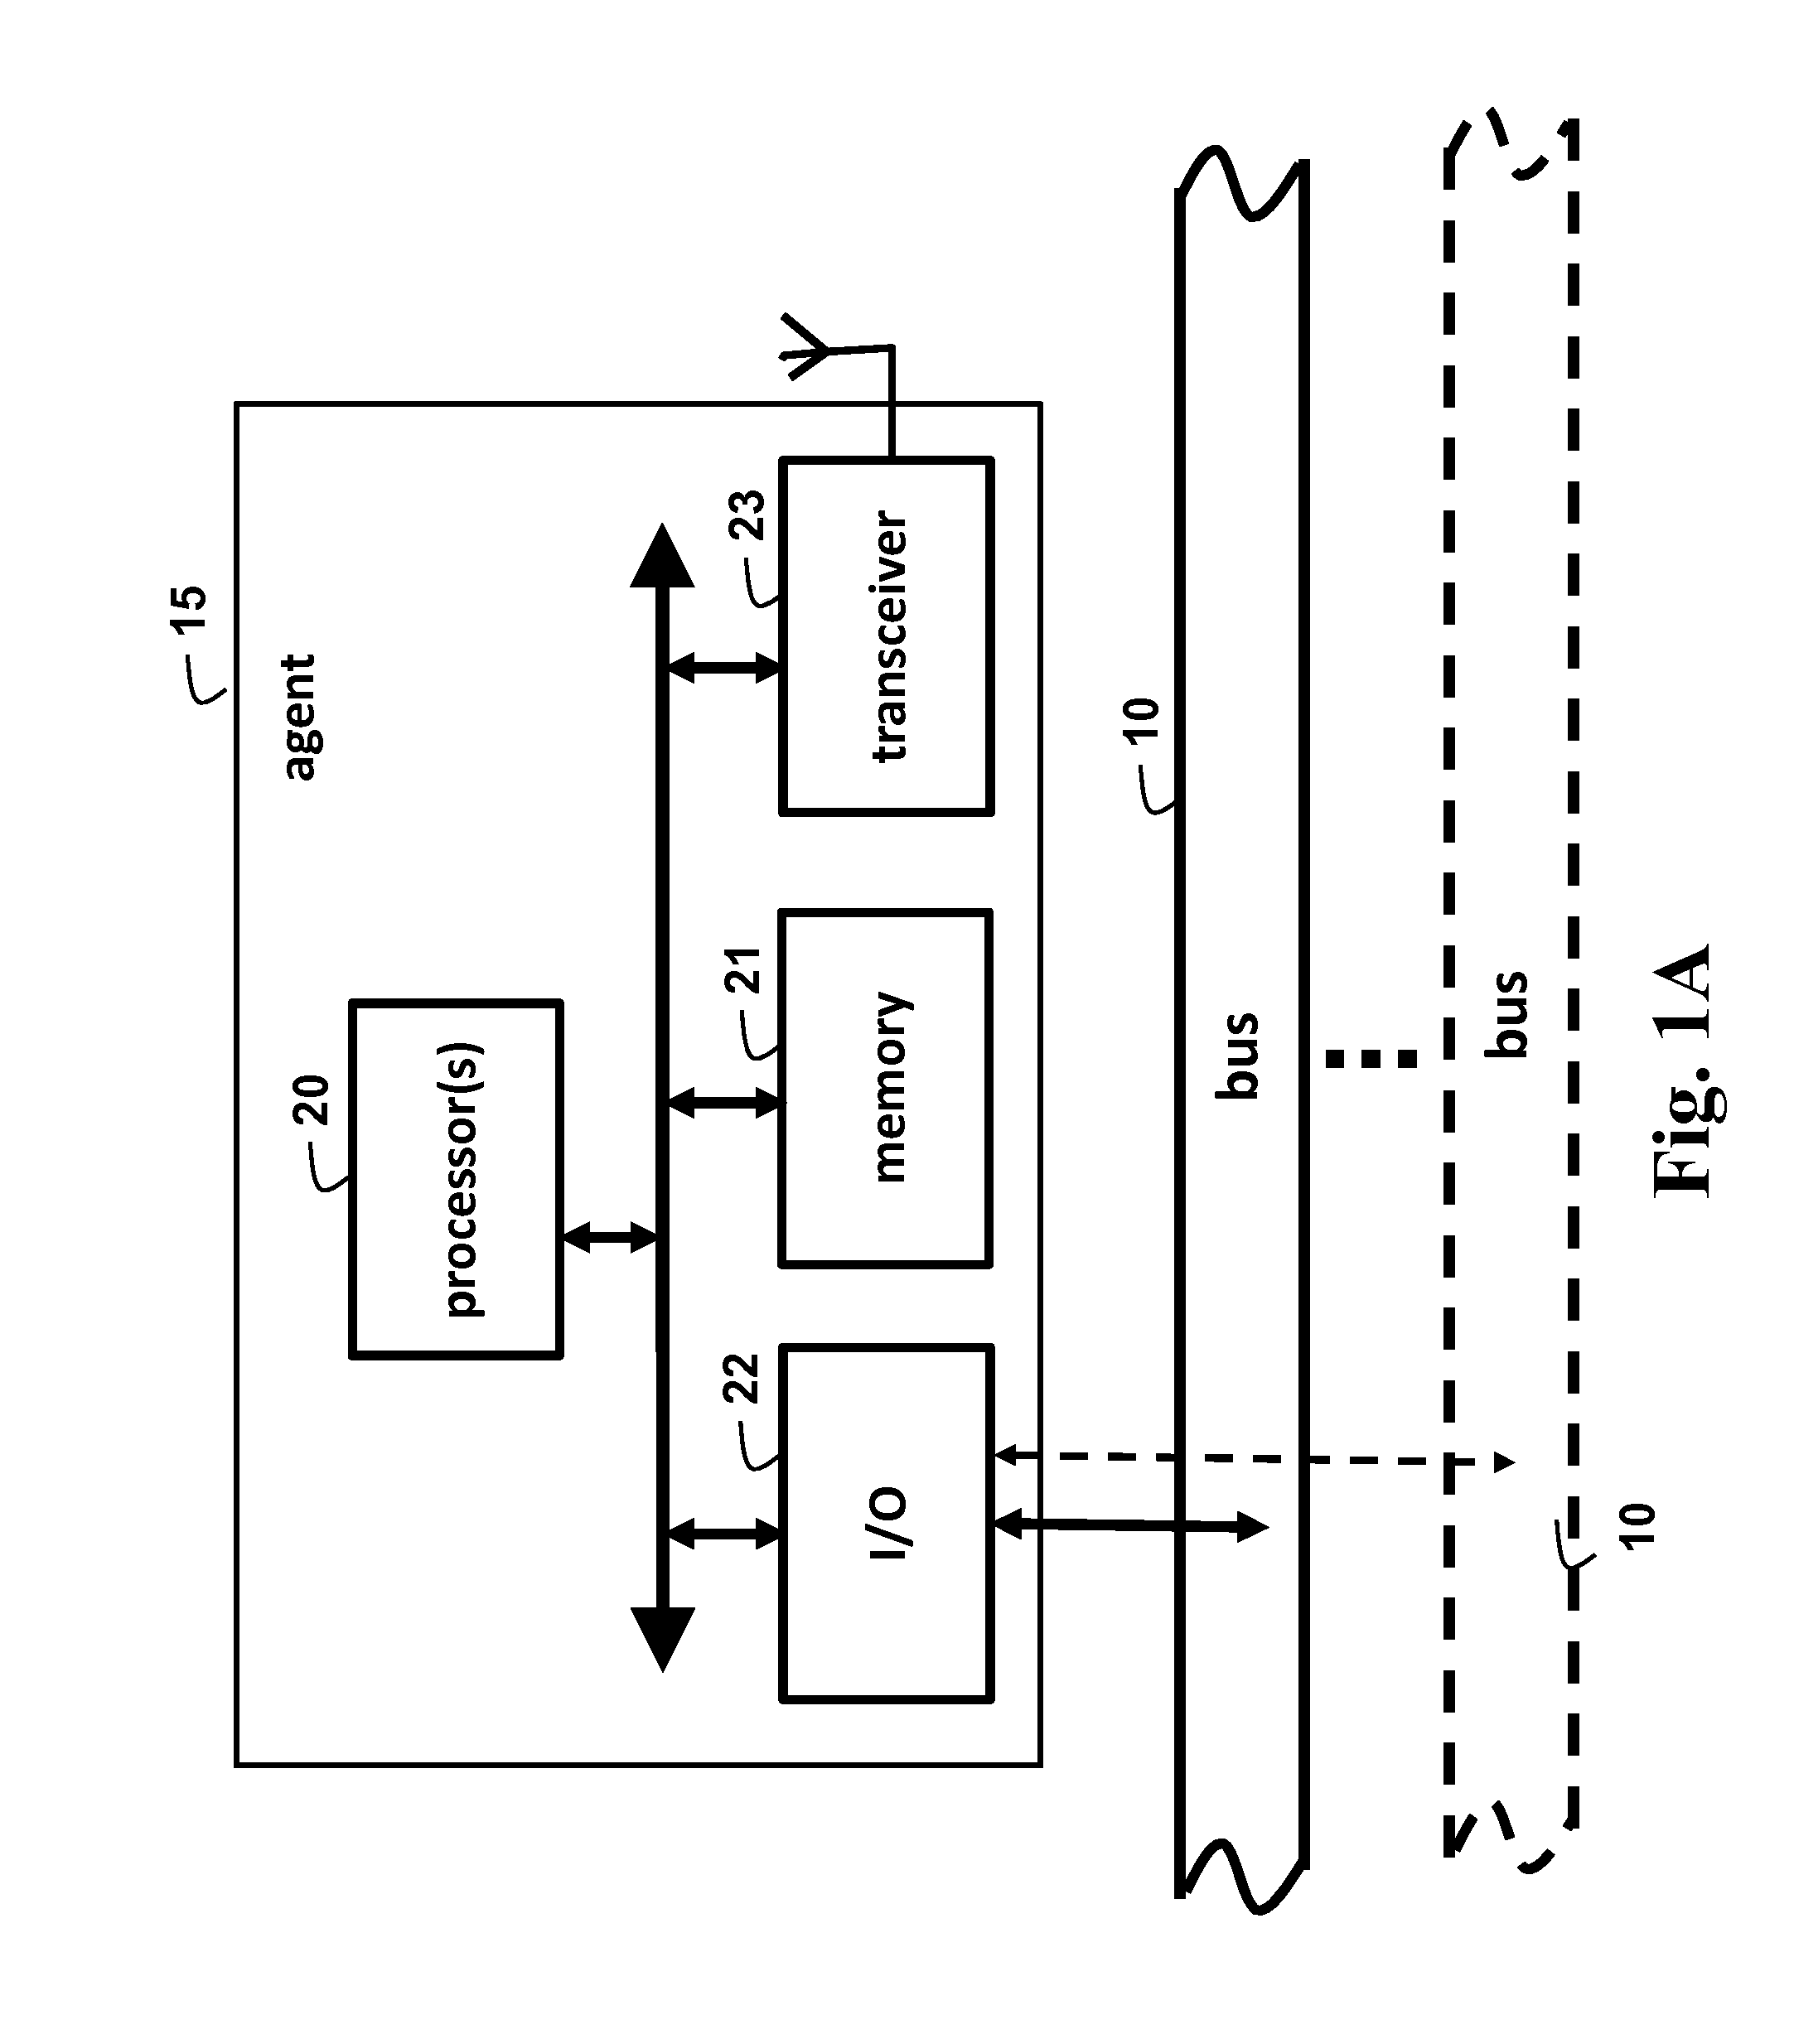 Method for Estimating Optimal Power Flows in Power Grids using Consensus-Based Distributed Processing